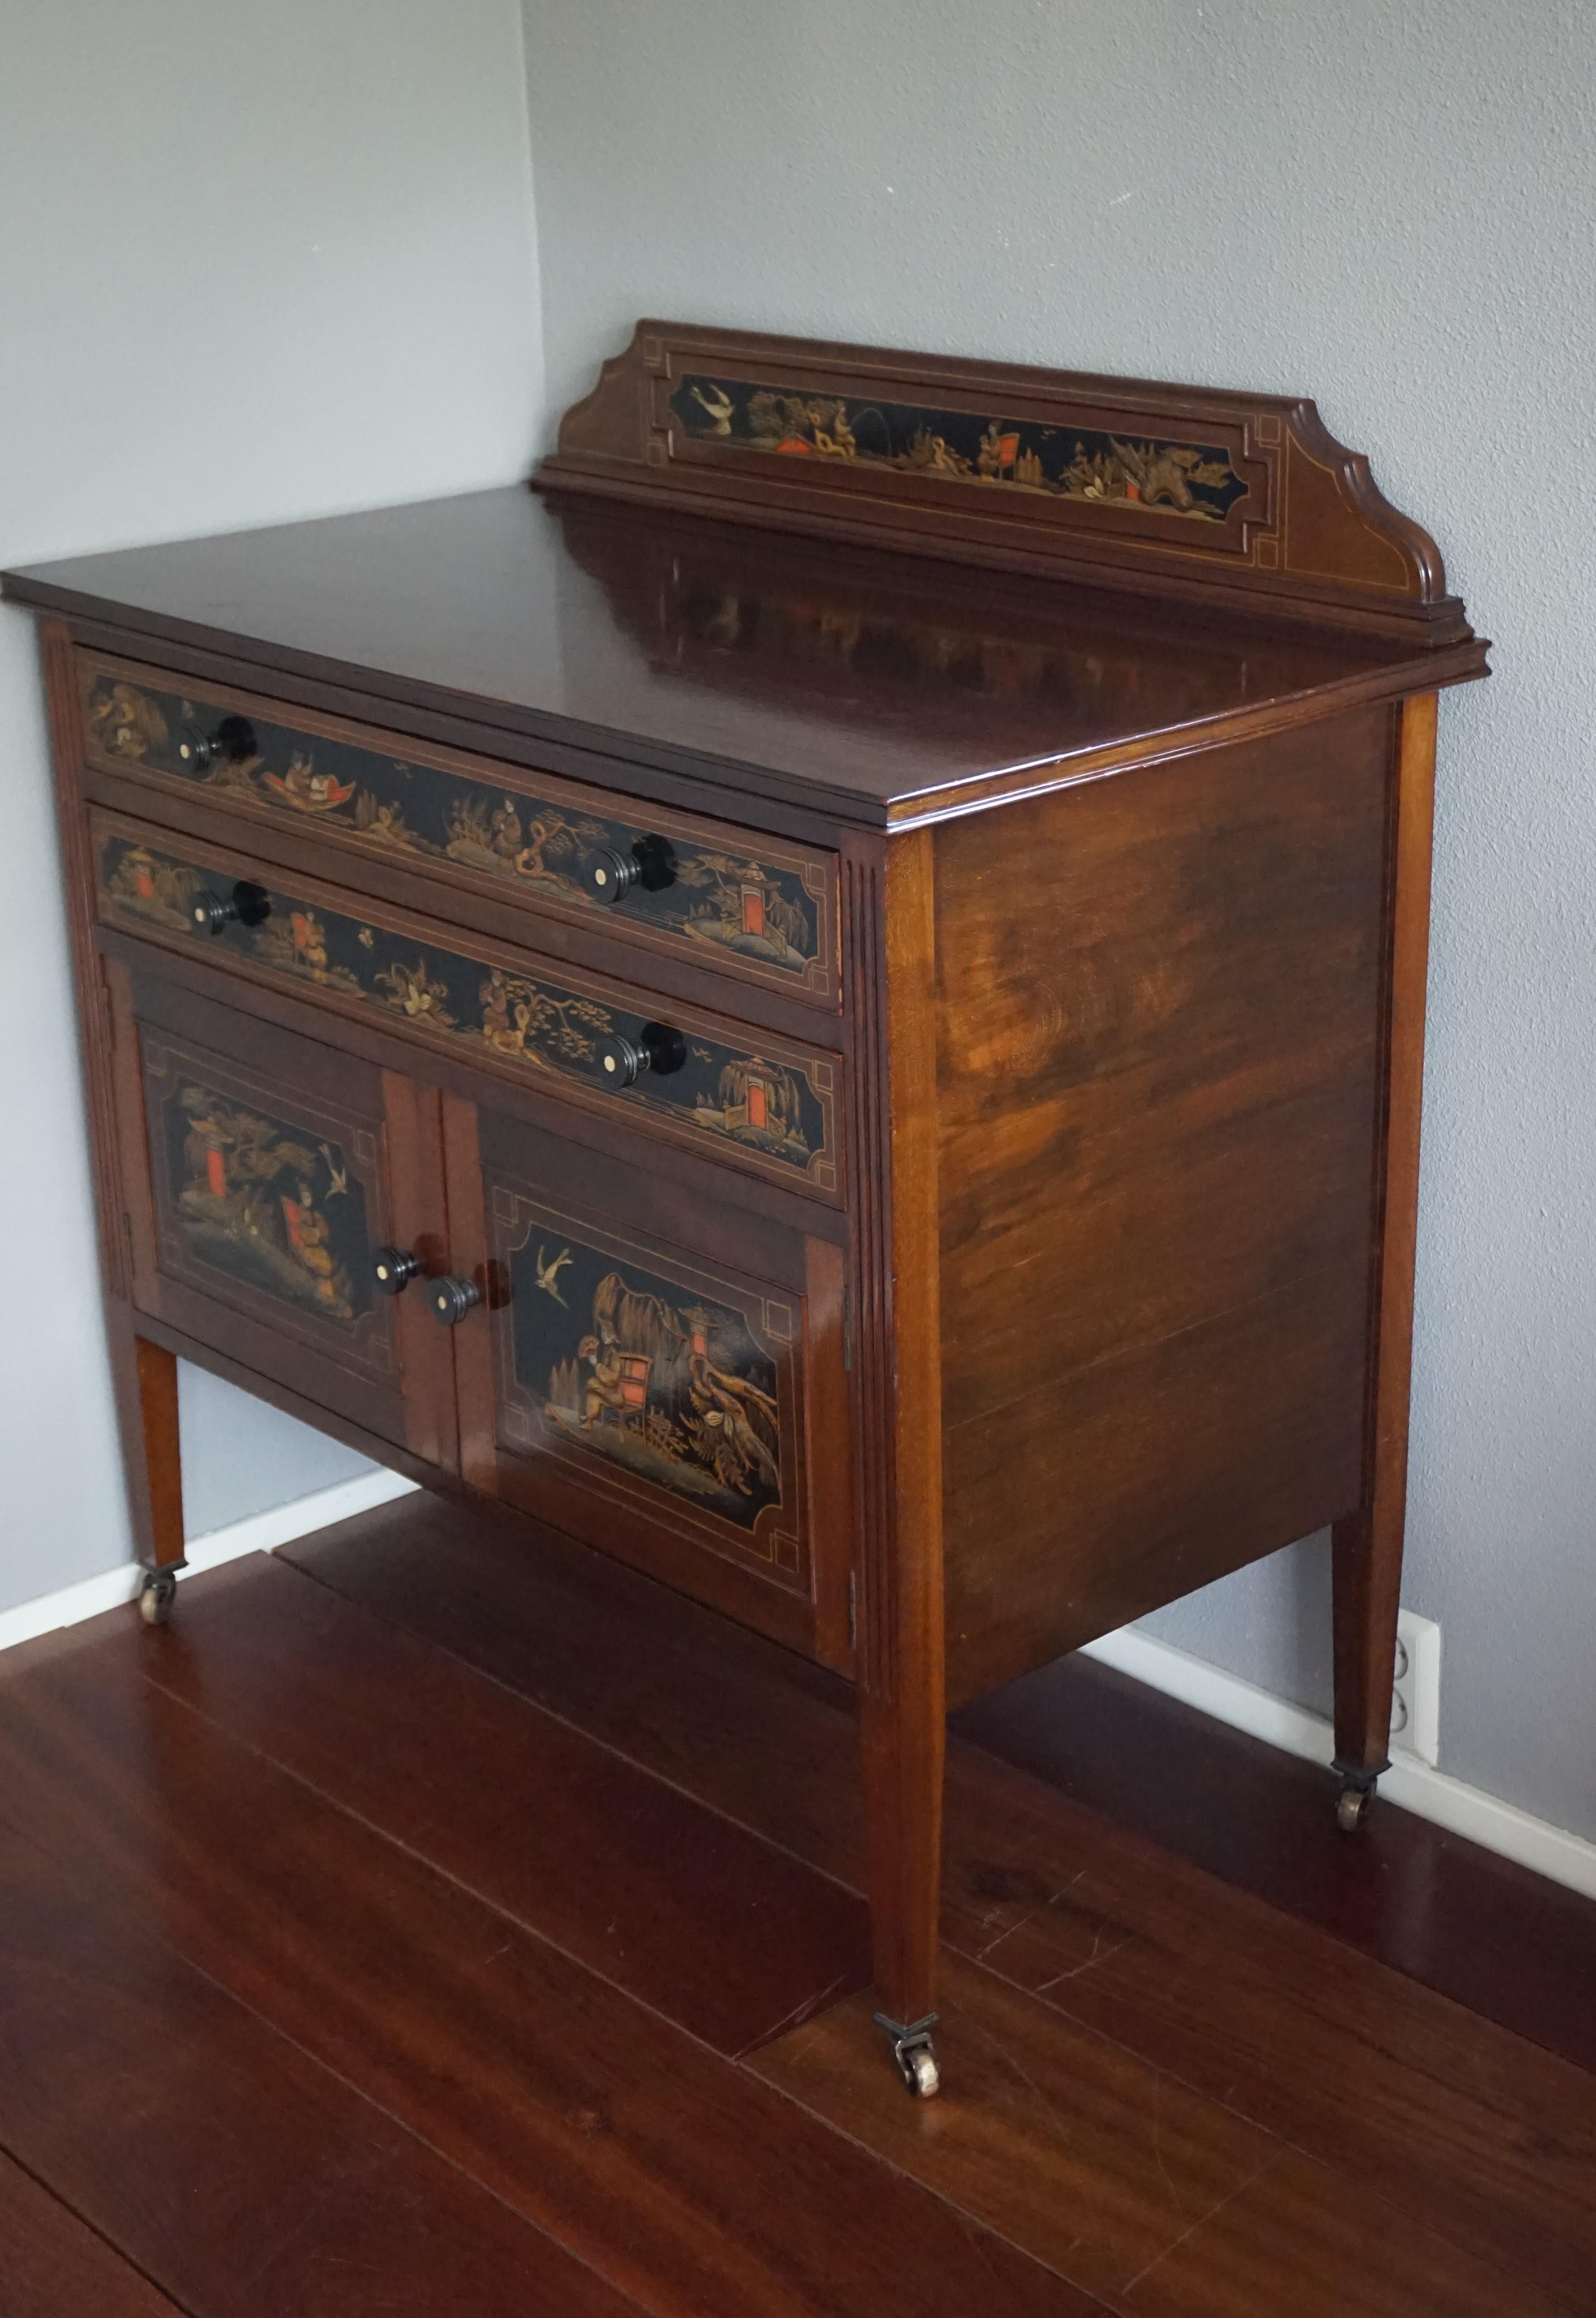 British Antique & Hand-Painted, Mahogany Dresser / Commode in Stunning Chinoiserie Style